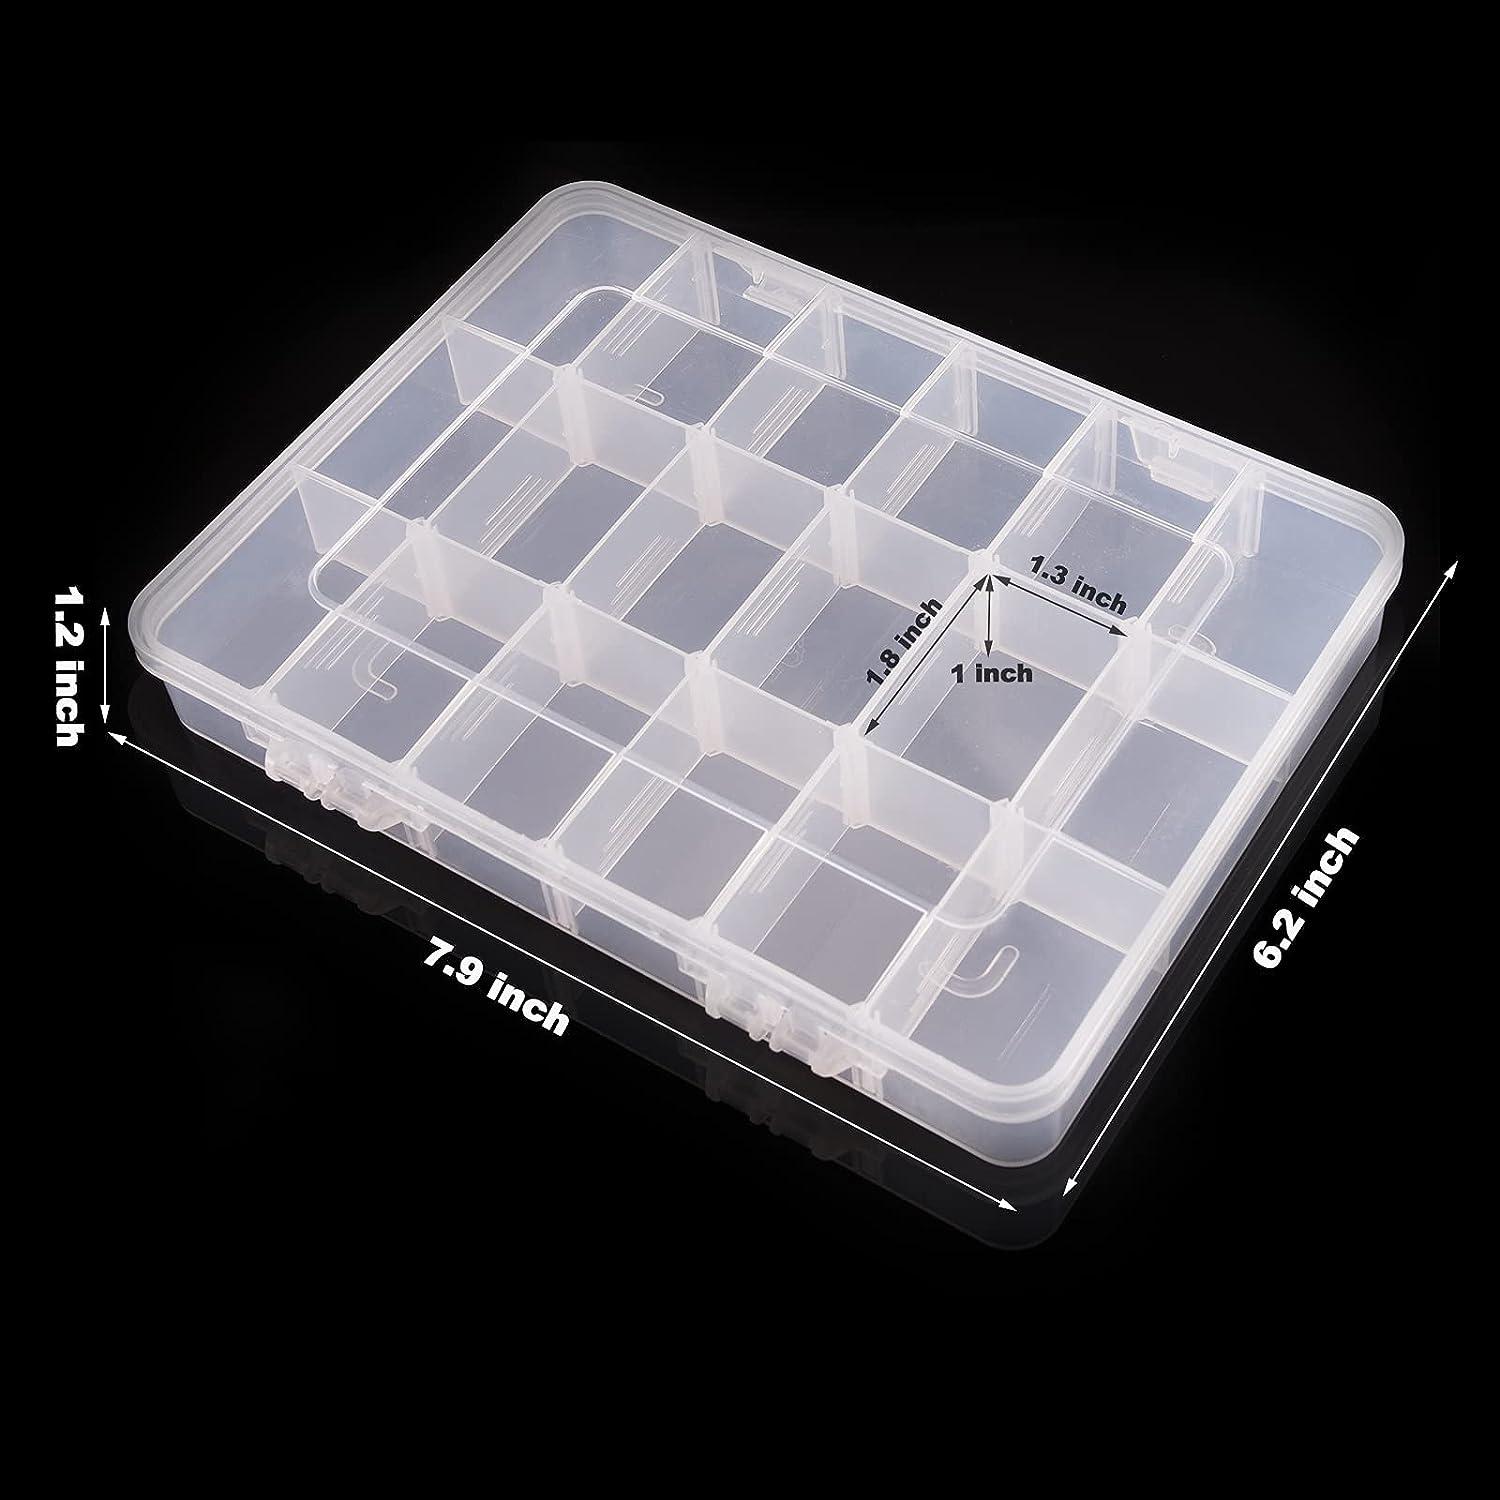 18 Grids Plastic Organizer Box with Dividers, Exptolii Clear Compartment  Container Storage for Beads Crafts Jewelry Fishing Tackles, Size 7.9 x 6.2  x 1.2 in 1x 18 Grids